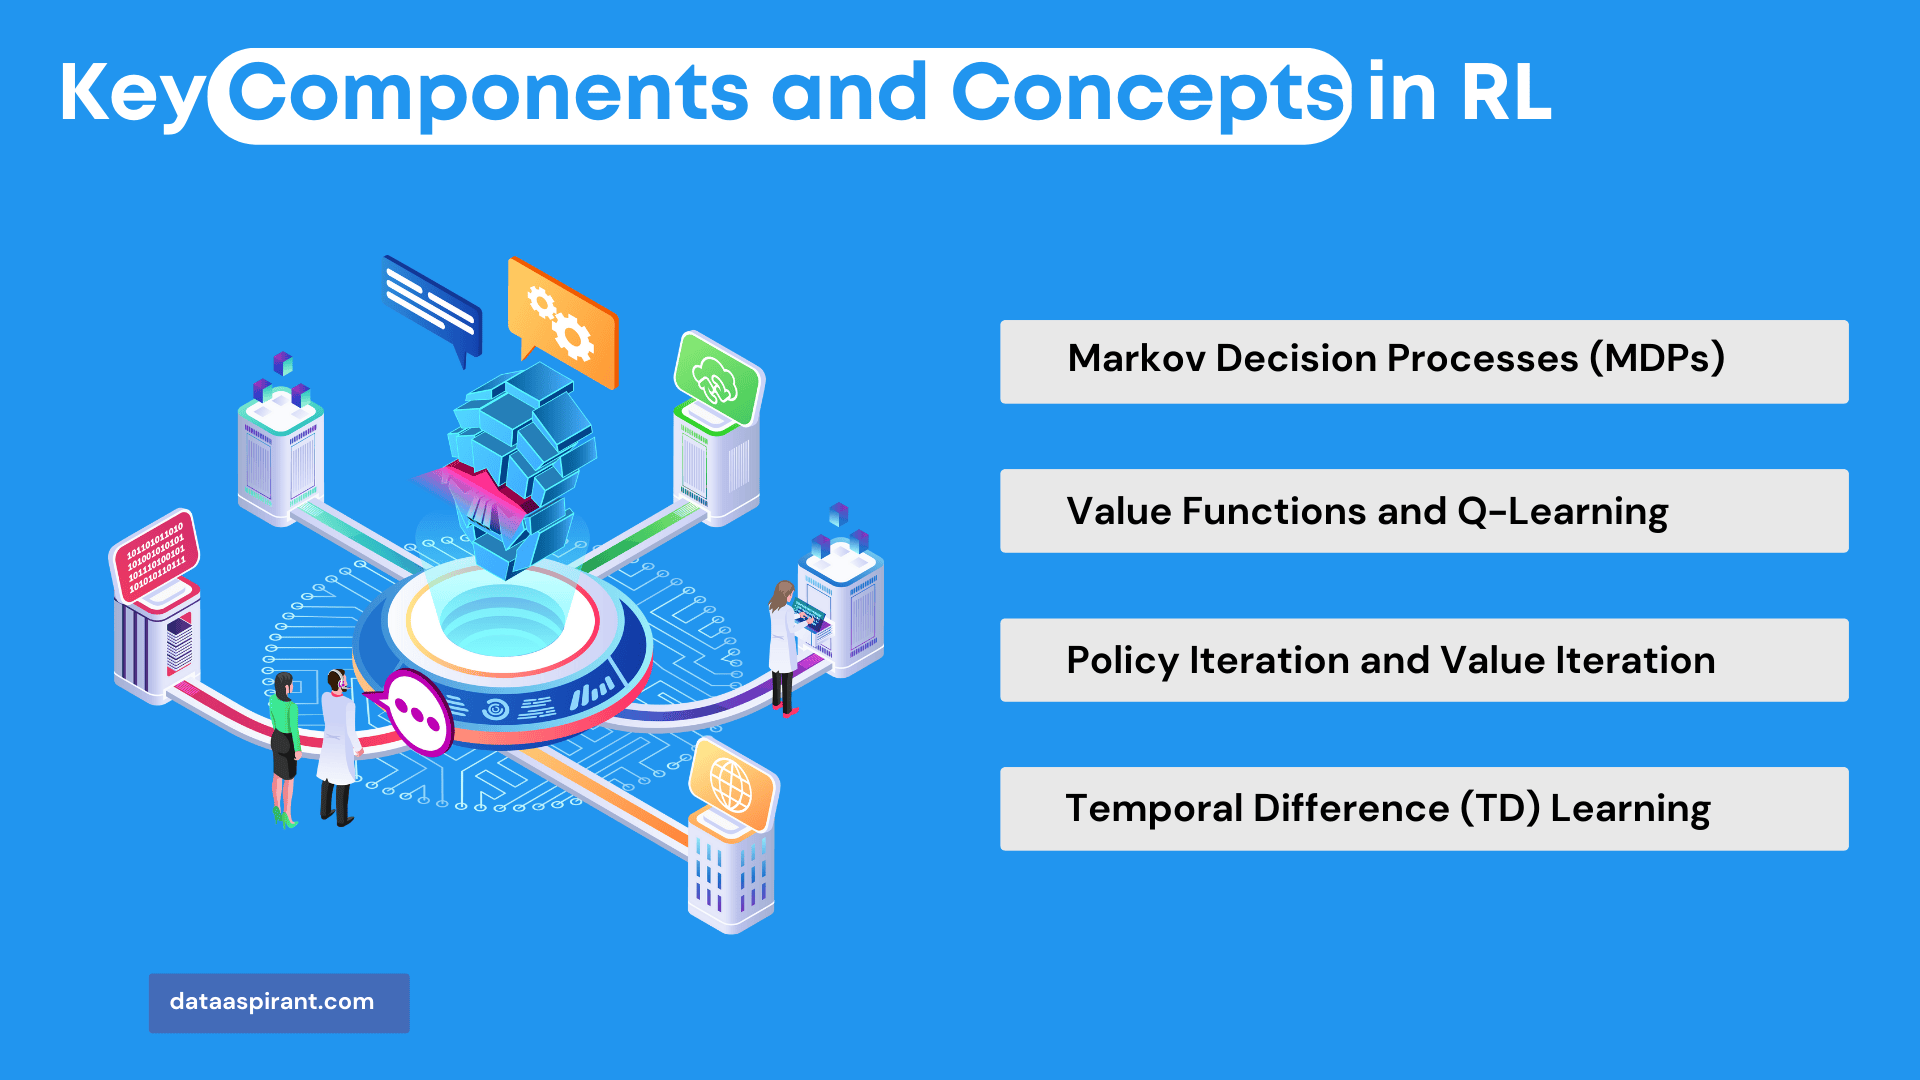 Key Components and Concepts in RL